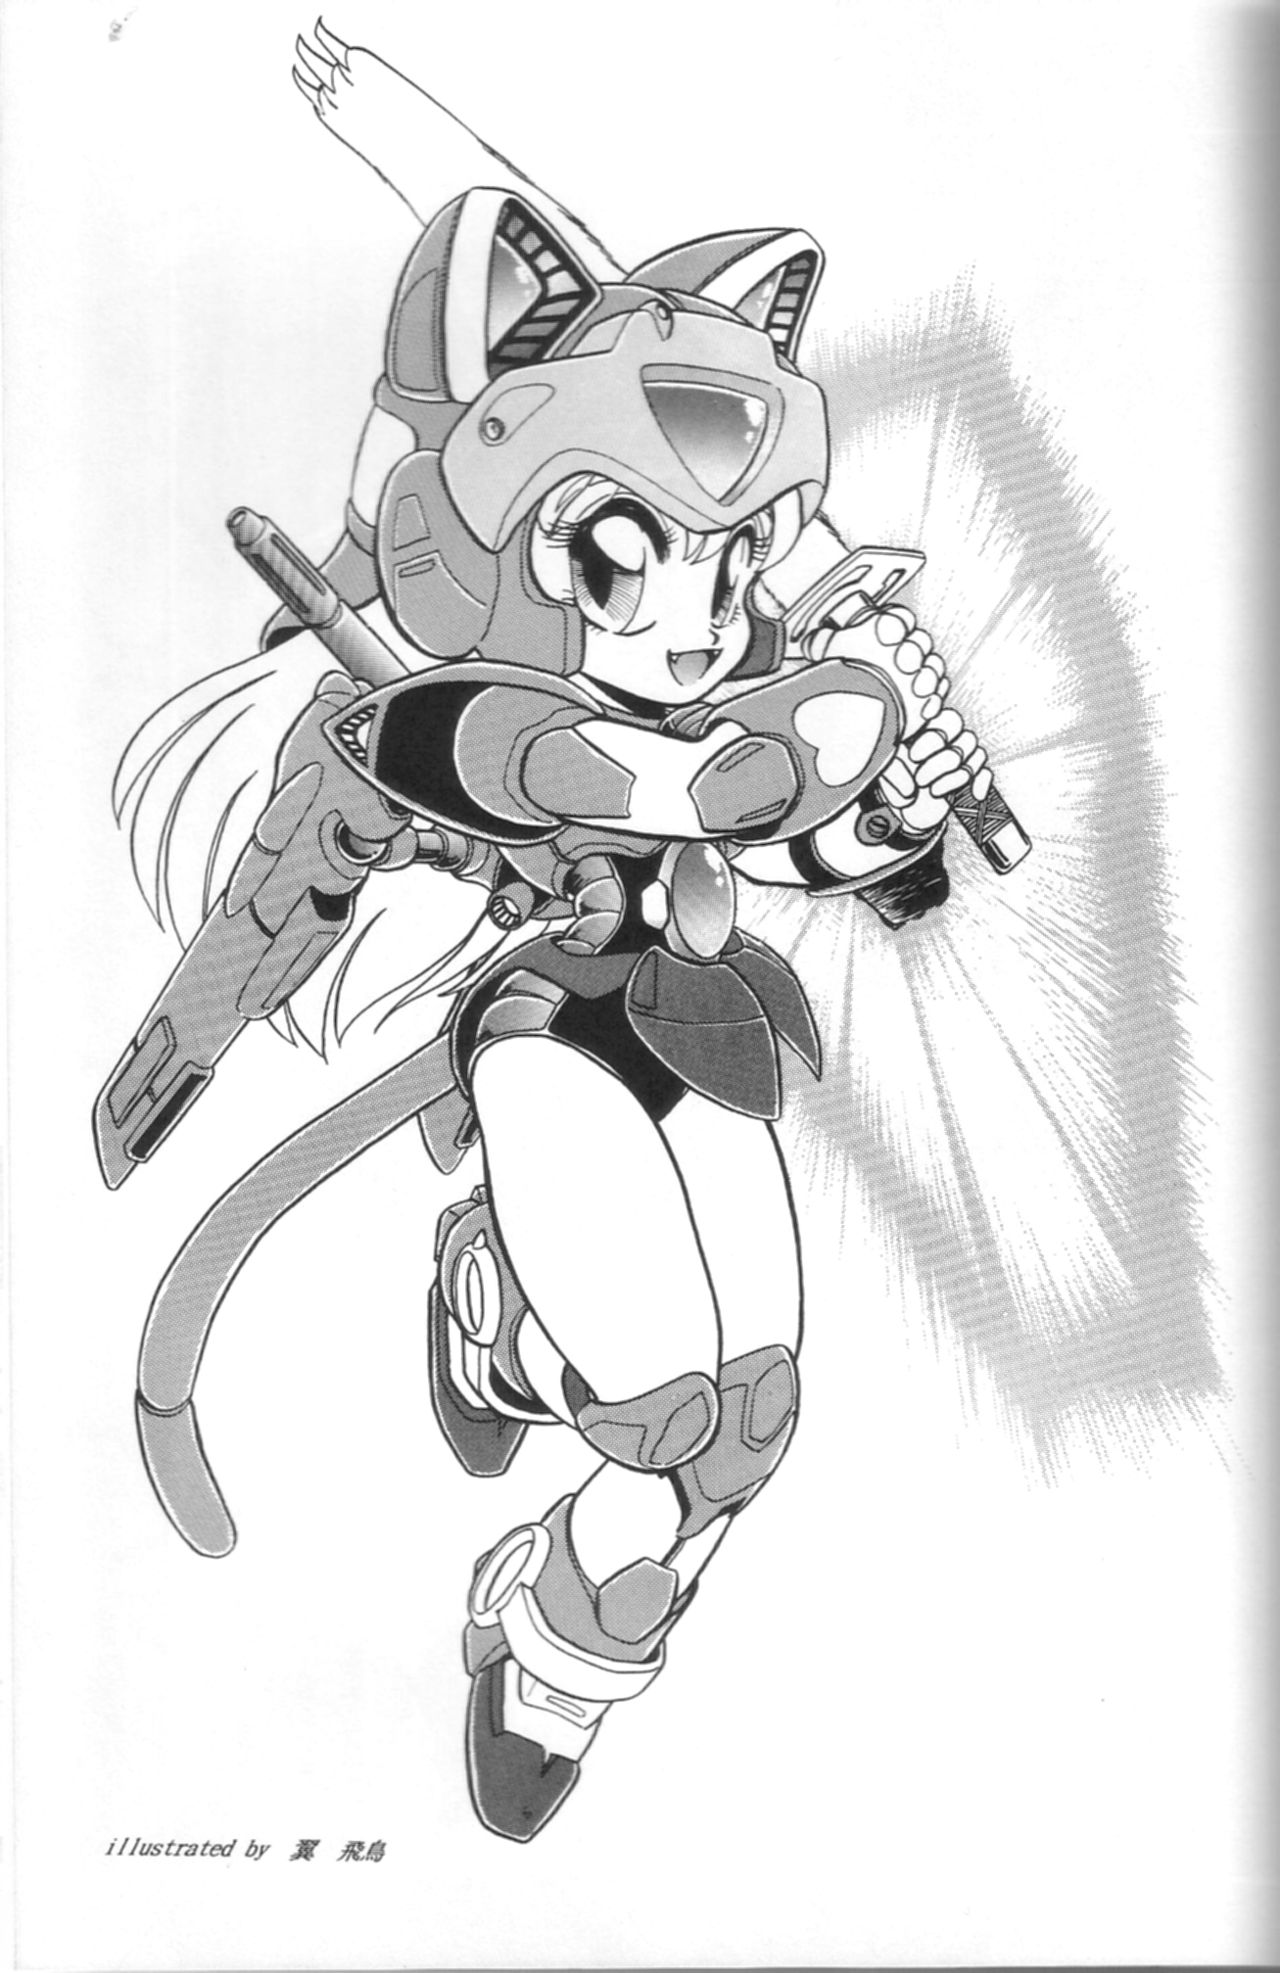 Samurai Pizza Cats Anniversary Memorial (Incomplete - Pinups ONLY) 